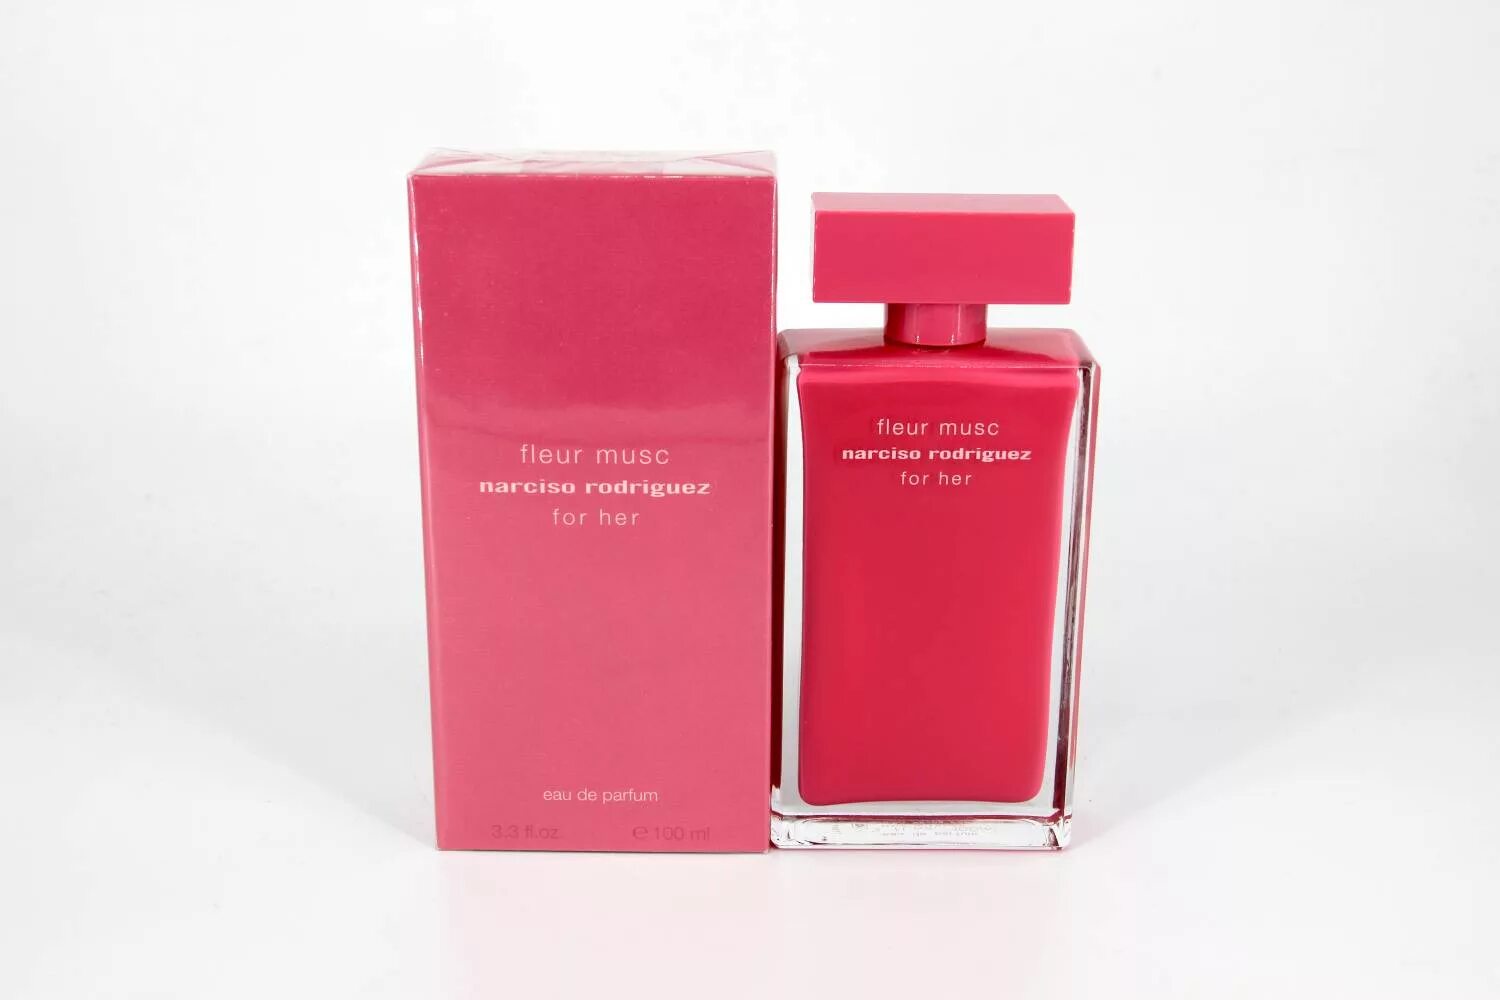 Narciso Rodriguez fleur Musc 100 мл. Narciso Rodriguez fleur Musc for her, 100 ml. Narciso Rodriguez fleur Musc for her EDT, 100 ml (Luxe евро). Fleur Musk Narciso Rodriguez 50 мл. Флер муск